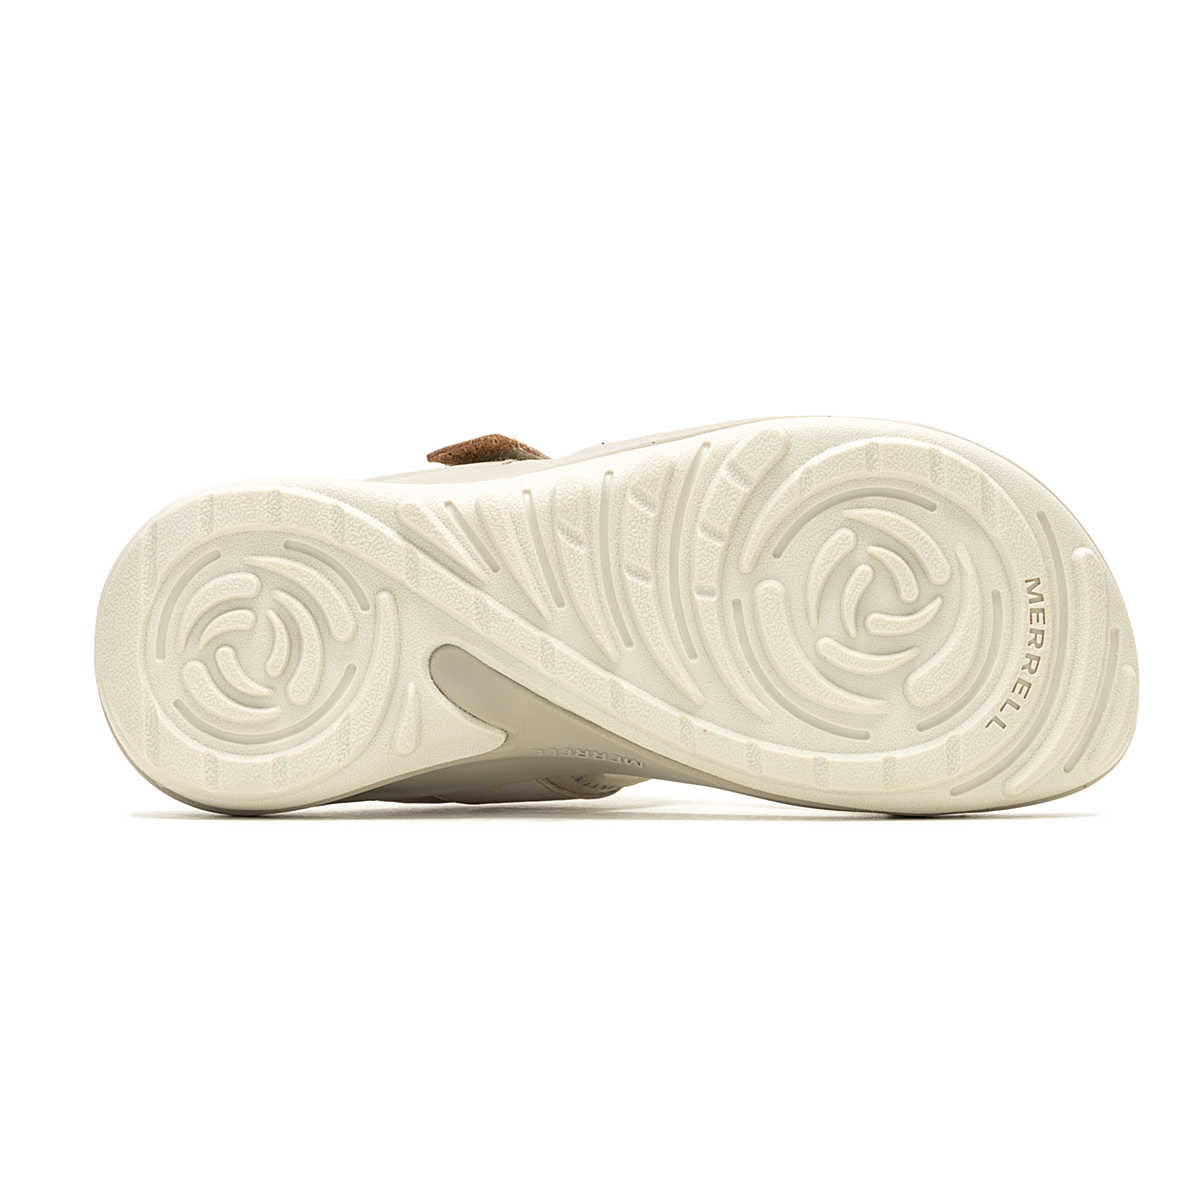 Sole of a beige Merrell Terran 4 Slide Incense sandal displaying a circular patterned tread and the Merrell brand name in the center.